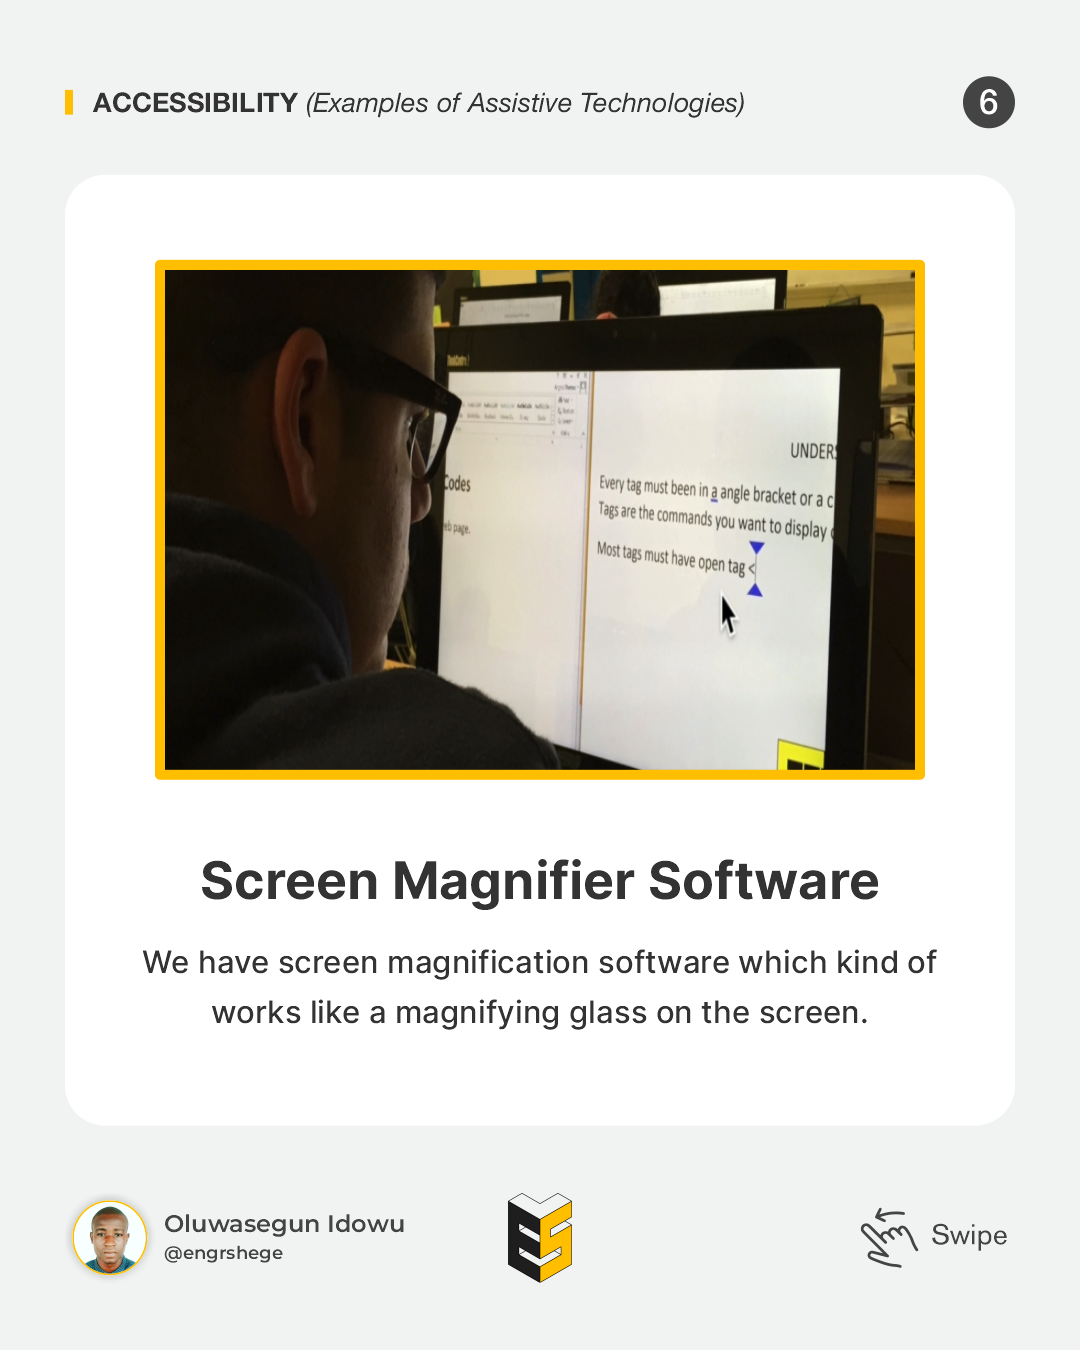 6. Examples of Assistive Technologies (Screen Magnifier Software)